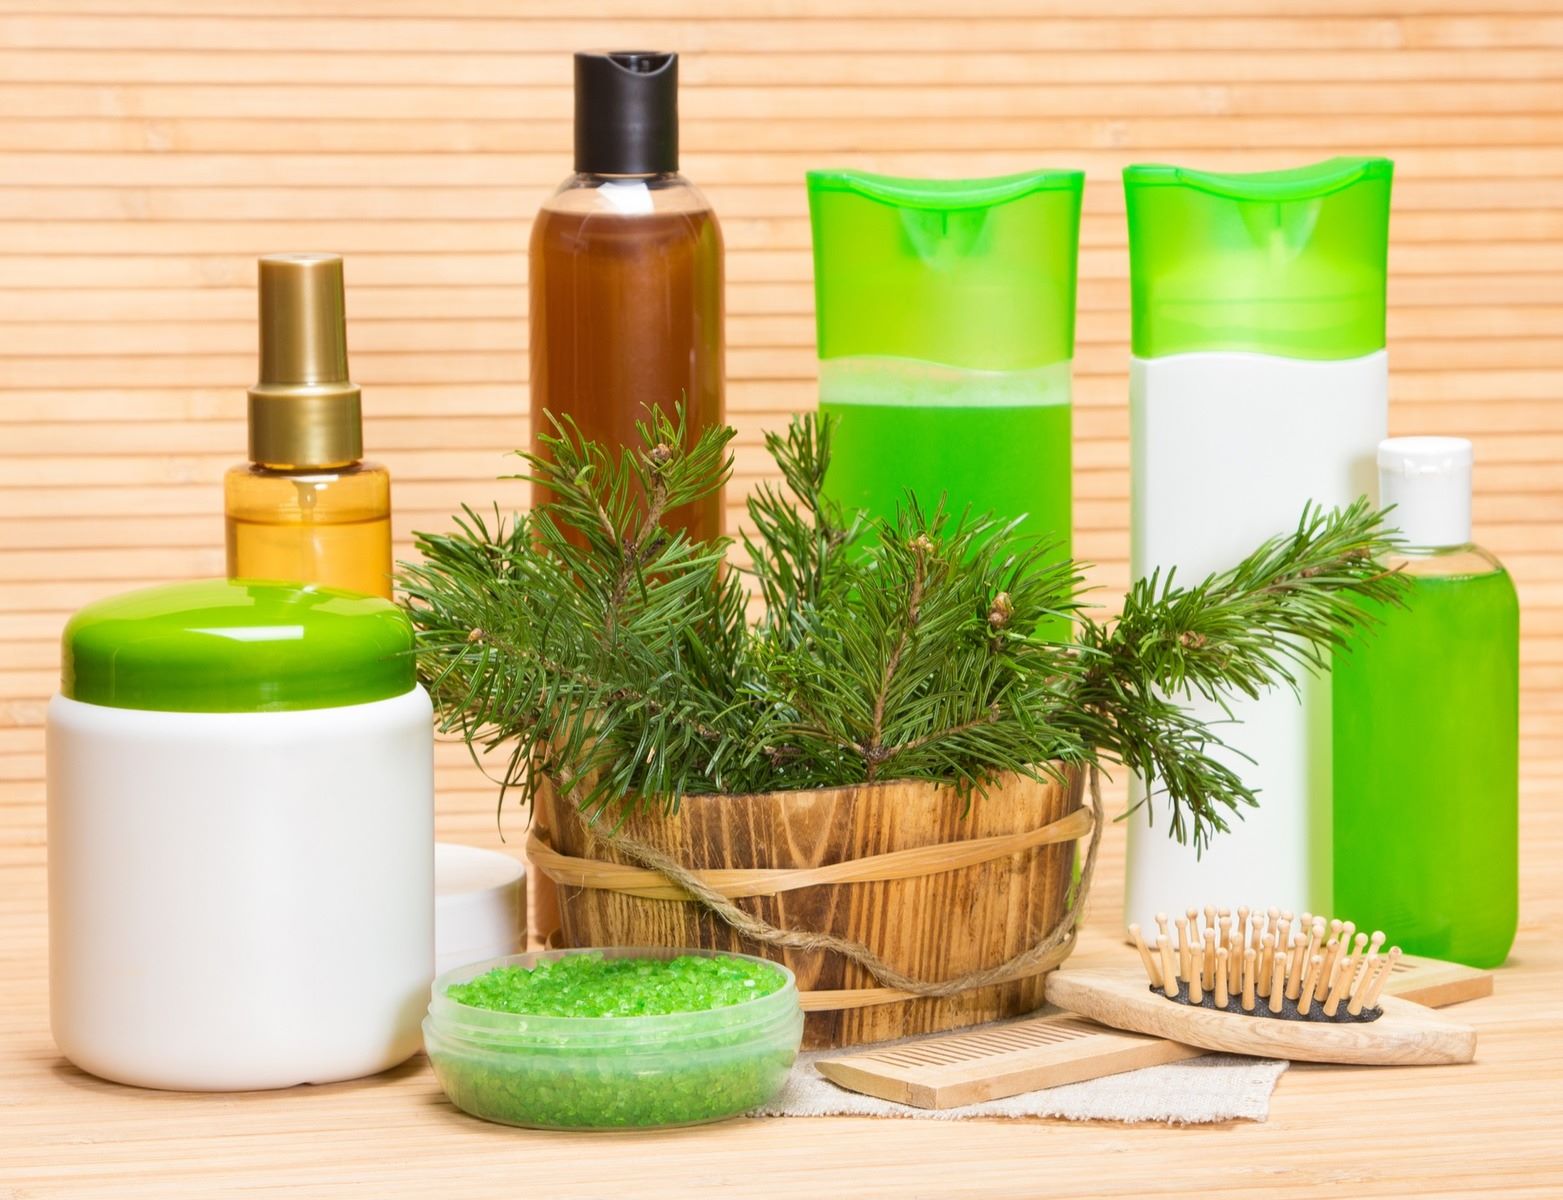 Choose gentle hair products to prevent hair damage